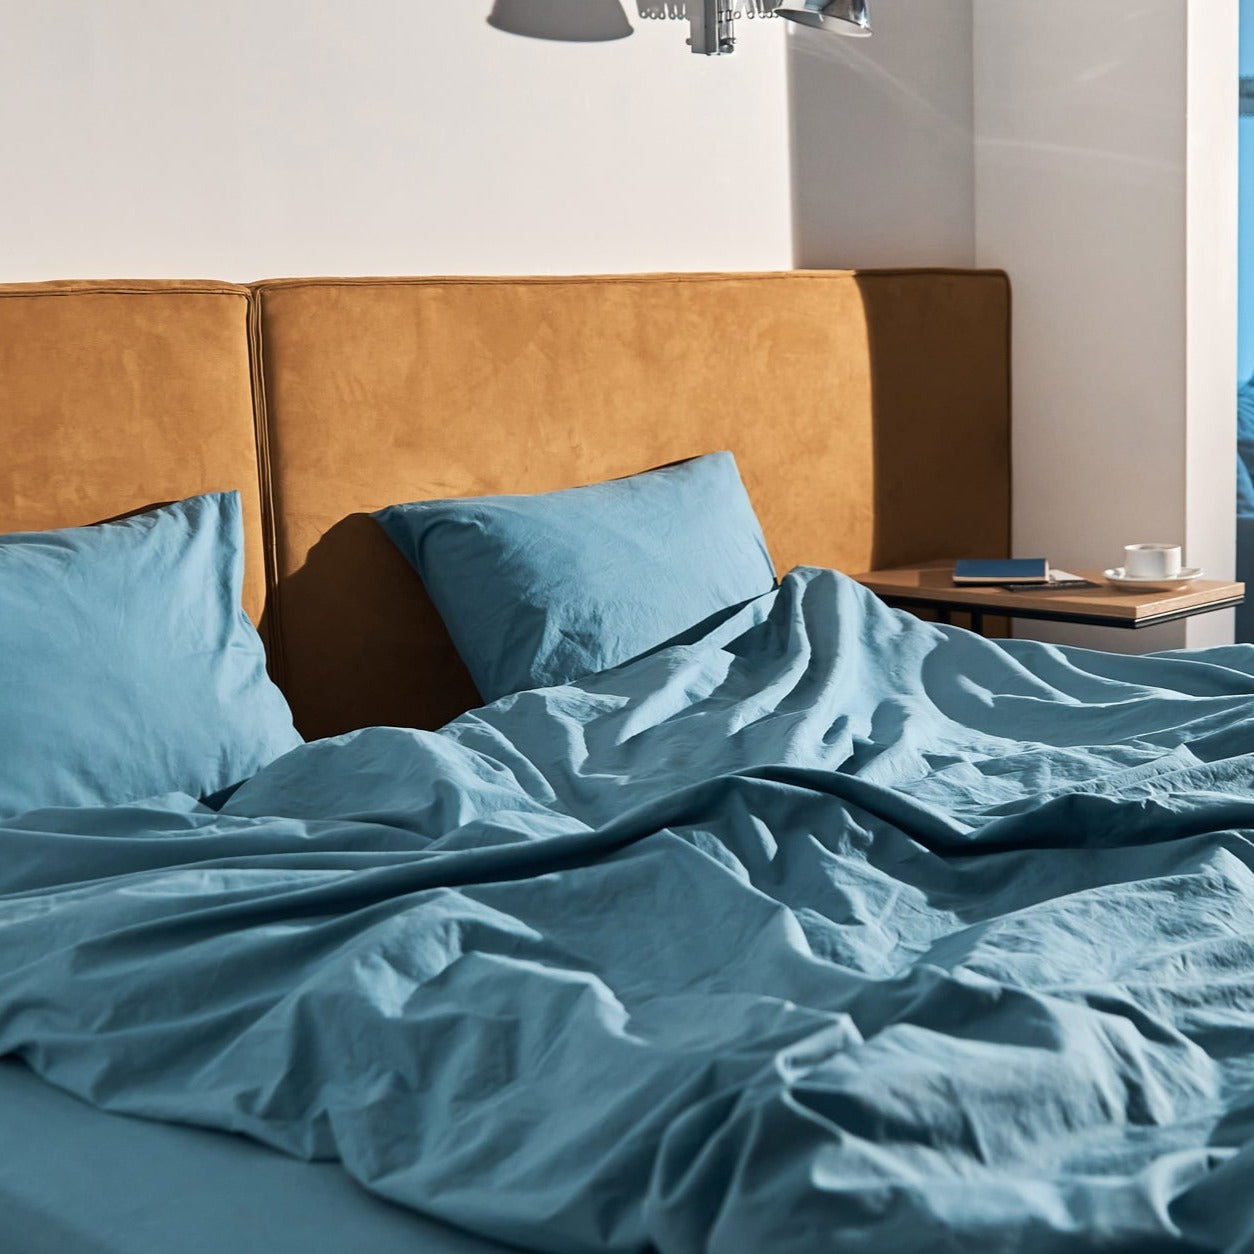 Duvet Cover "Sea" (Washed cotton)